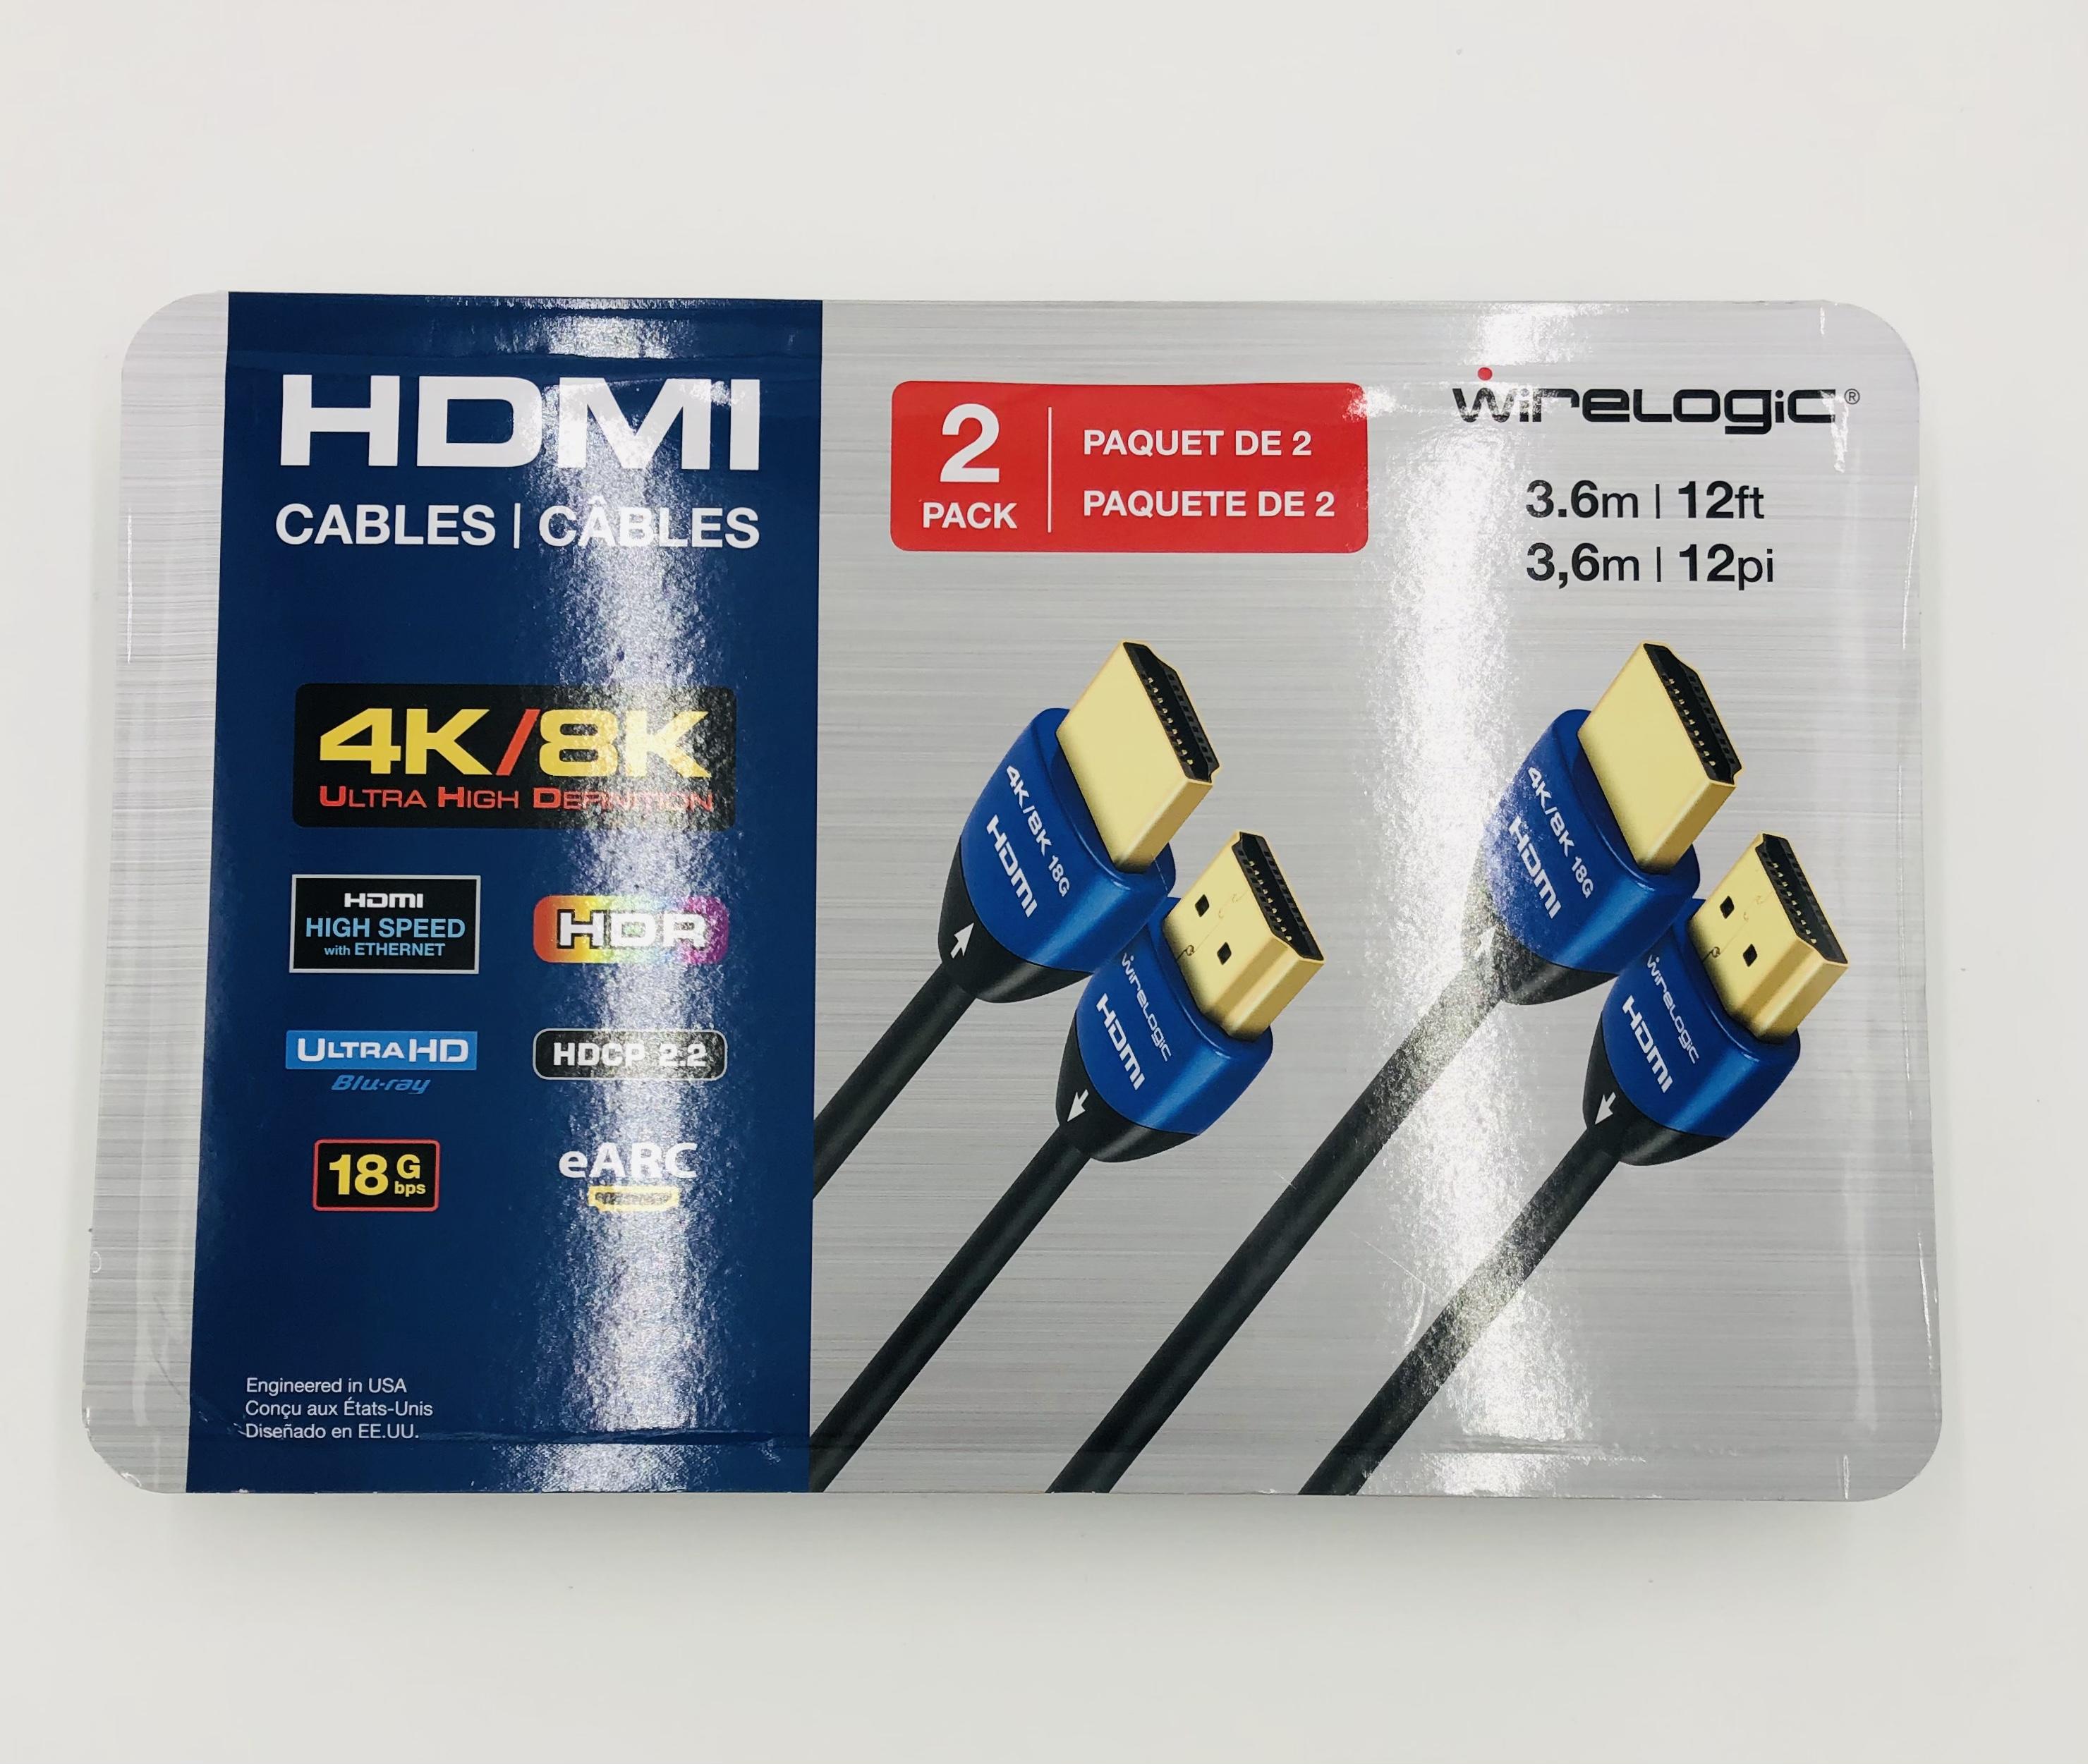 4K/8K Definition HDMI Cable